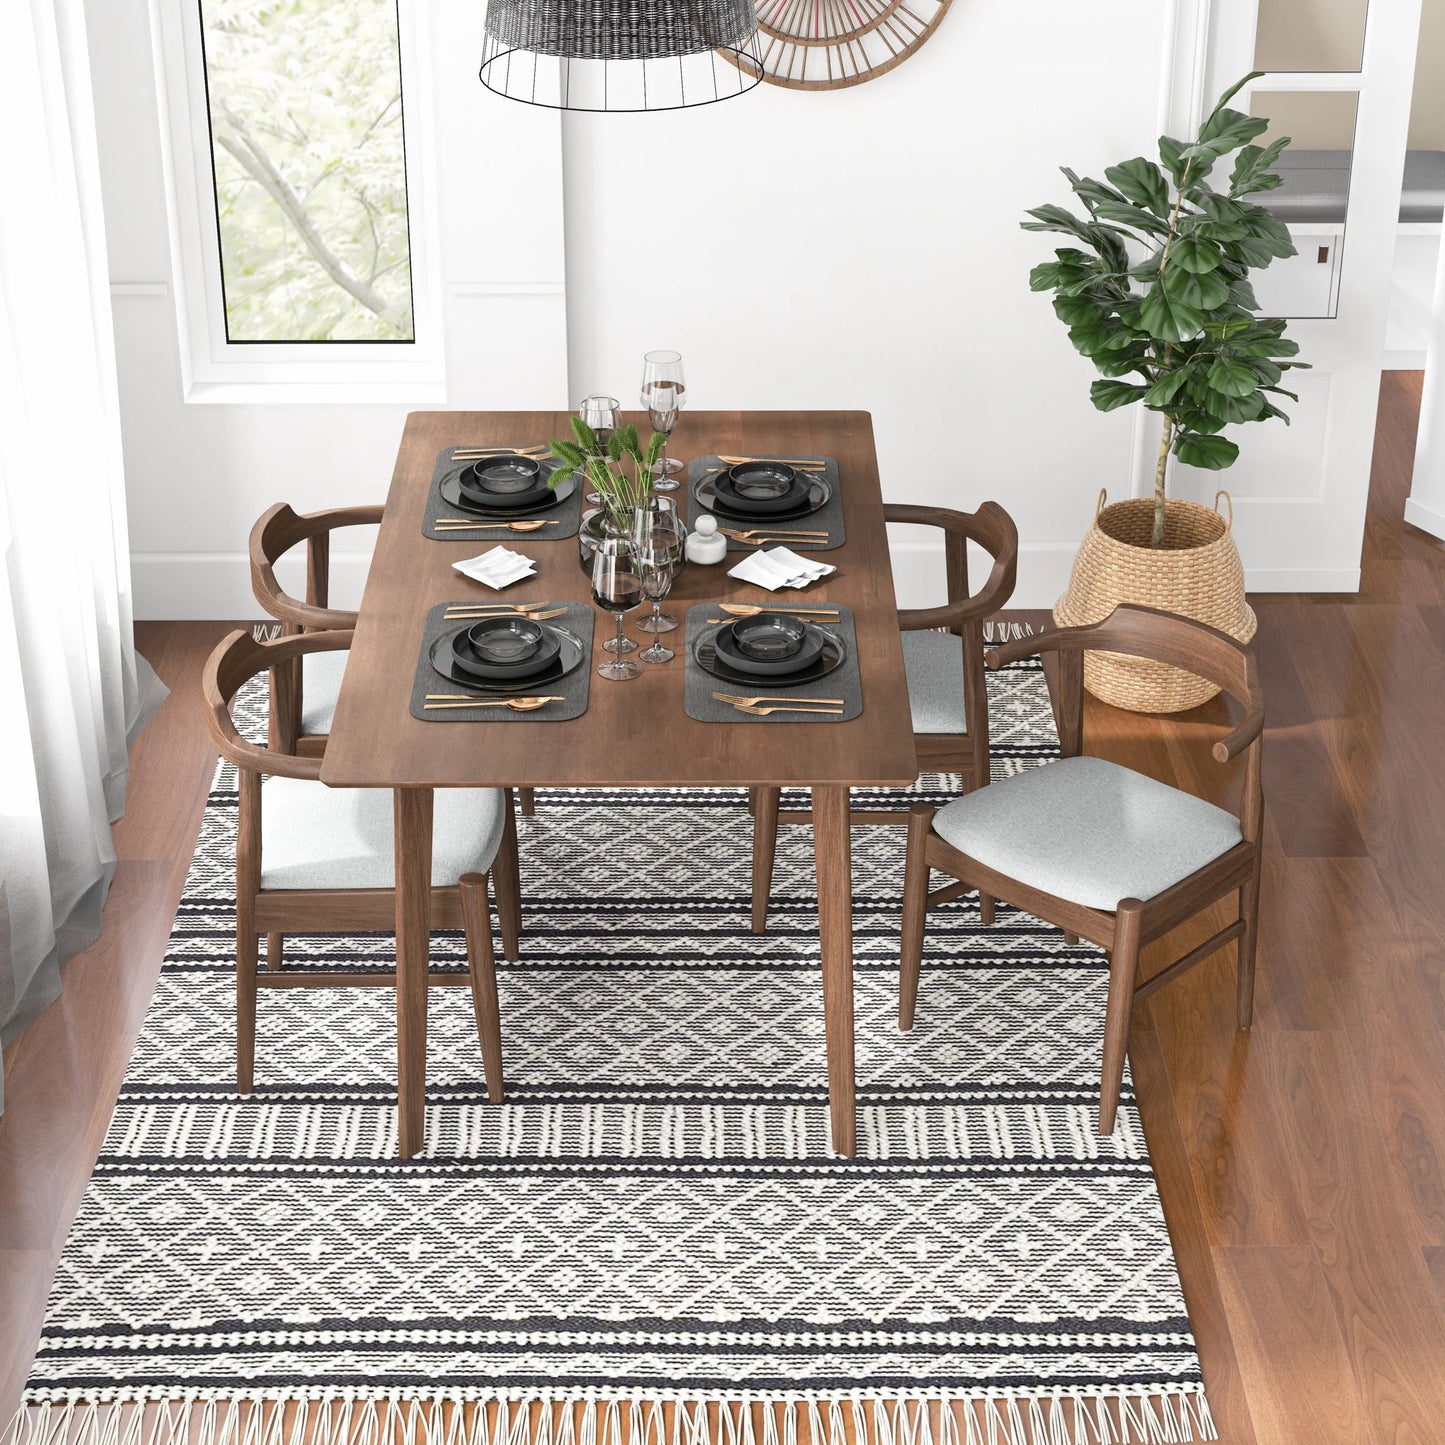 Dining Set, Abbott Large Table (Walnut) with 4 Zola Gray Chairs